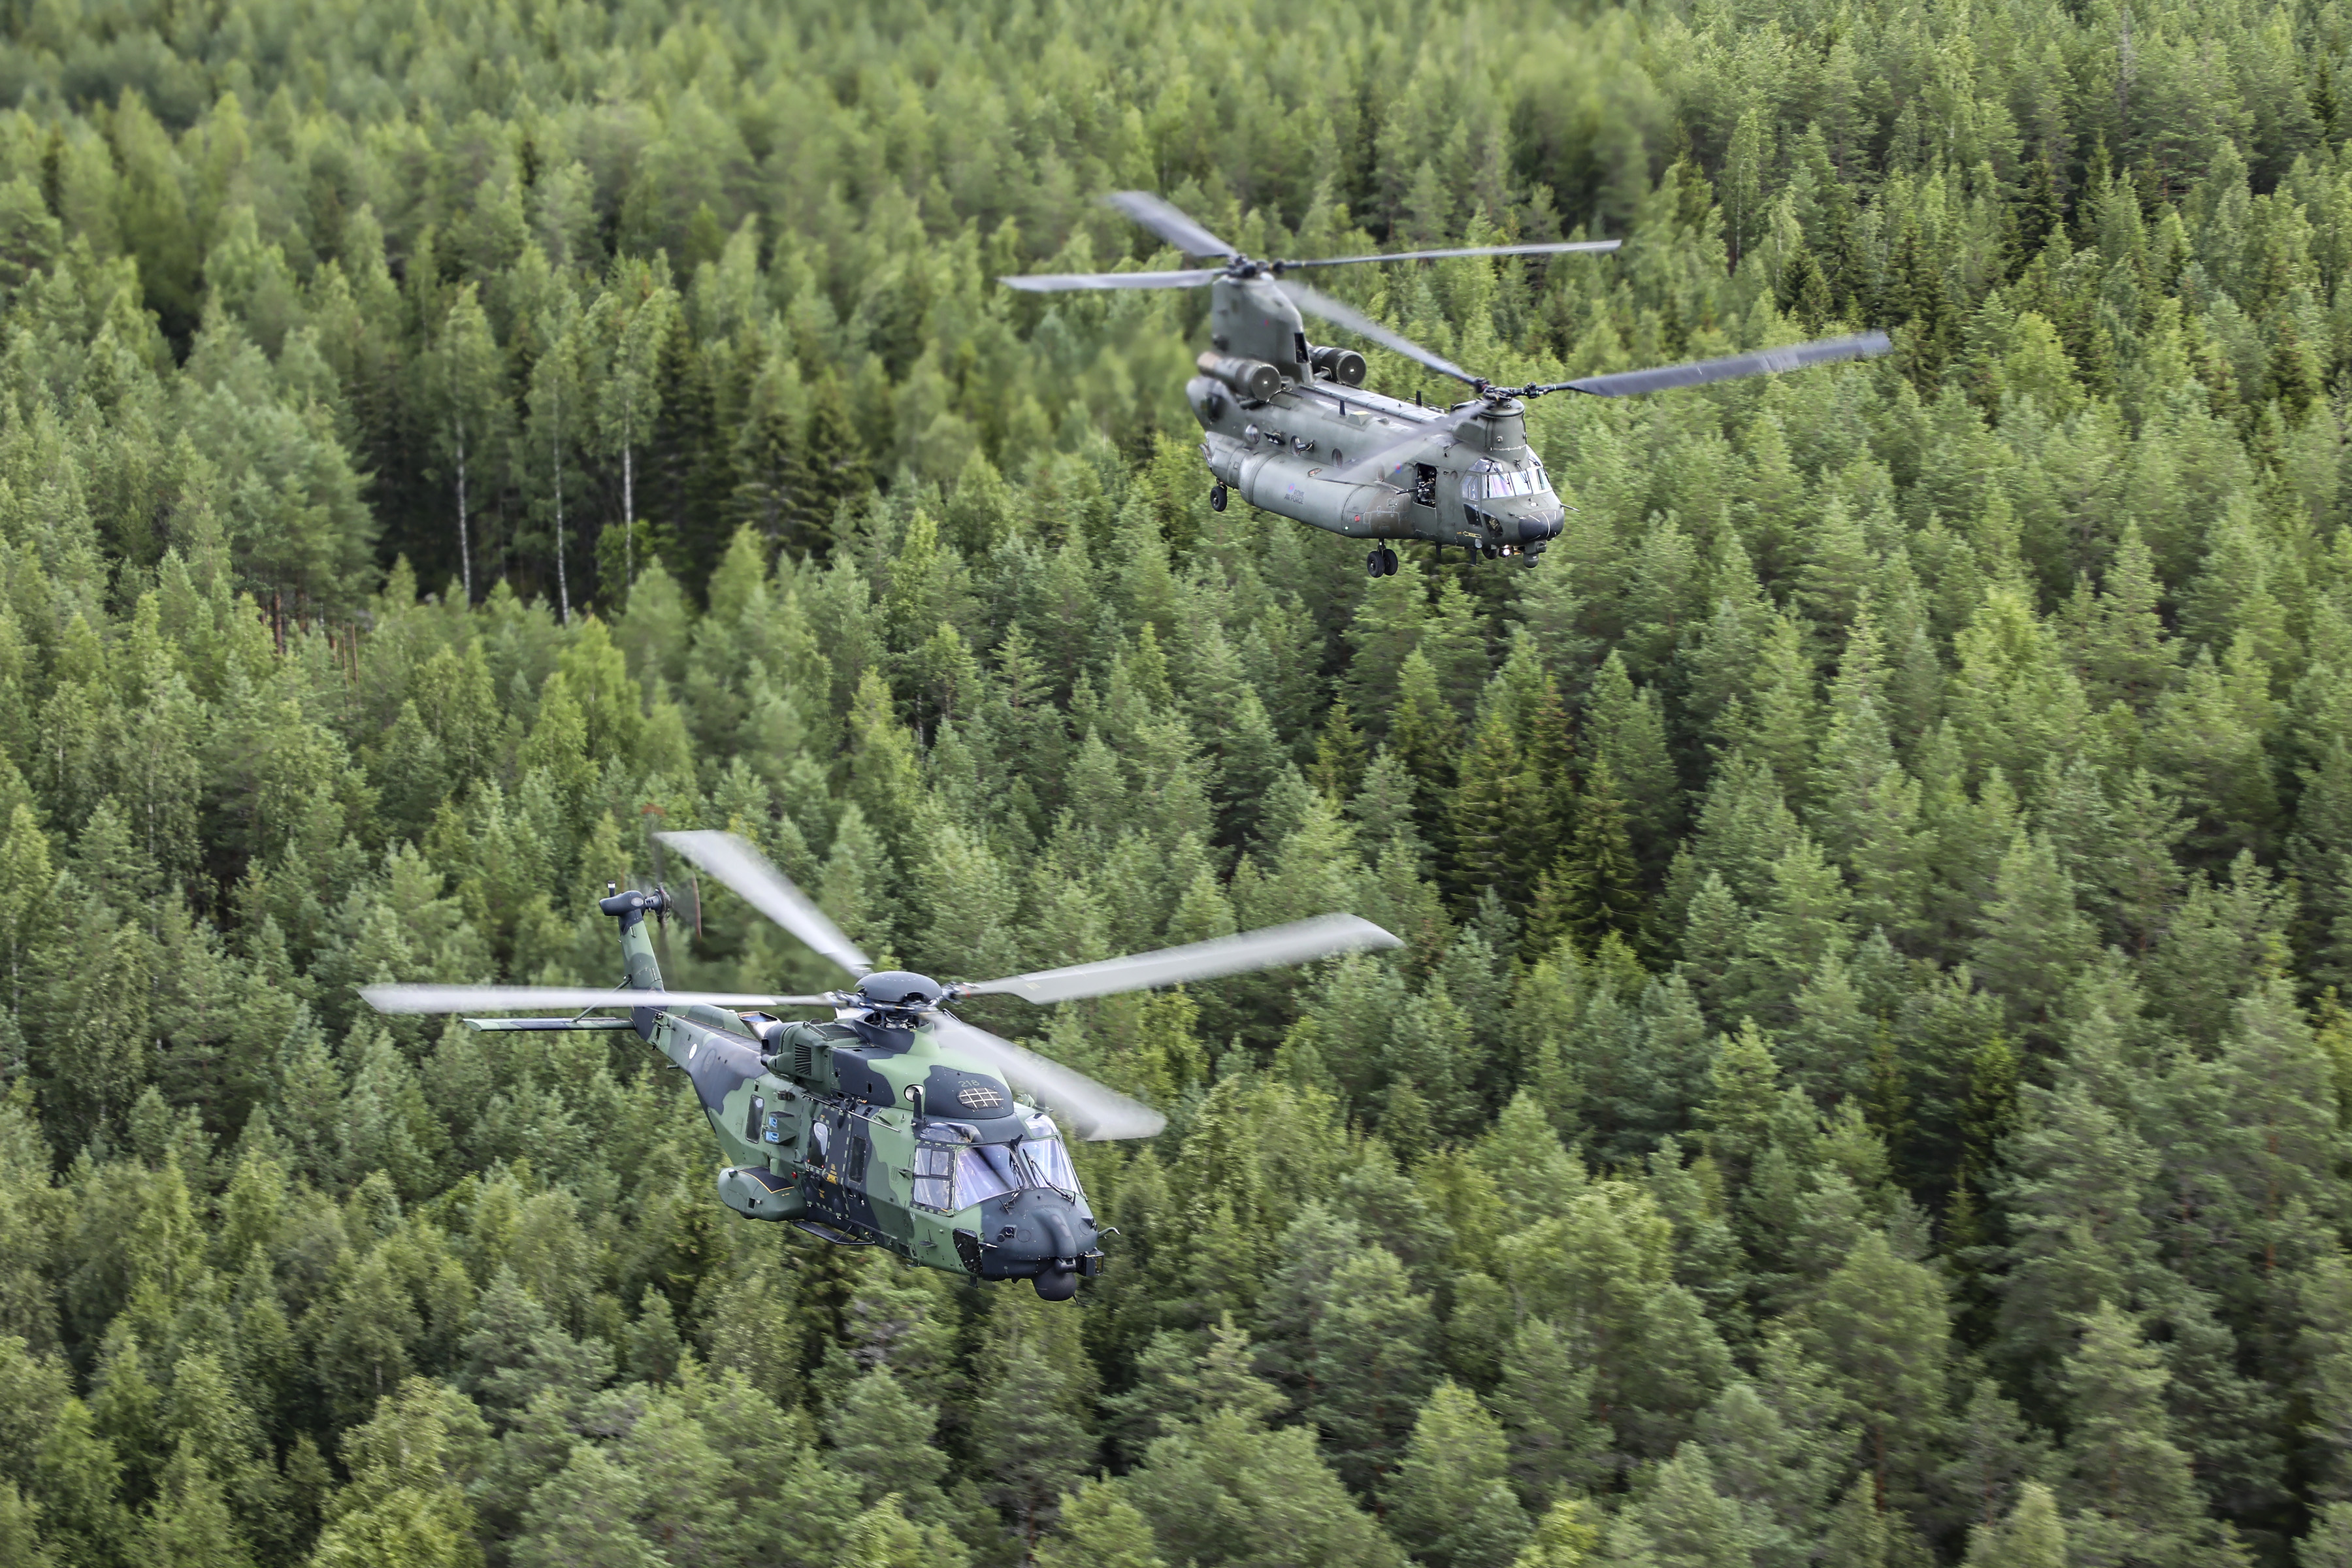 Image shows RAF Chinooks in flight, with camouflage paintwork.